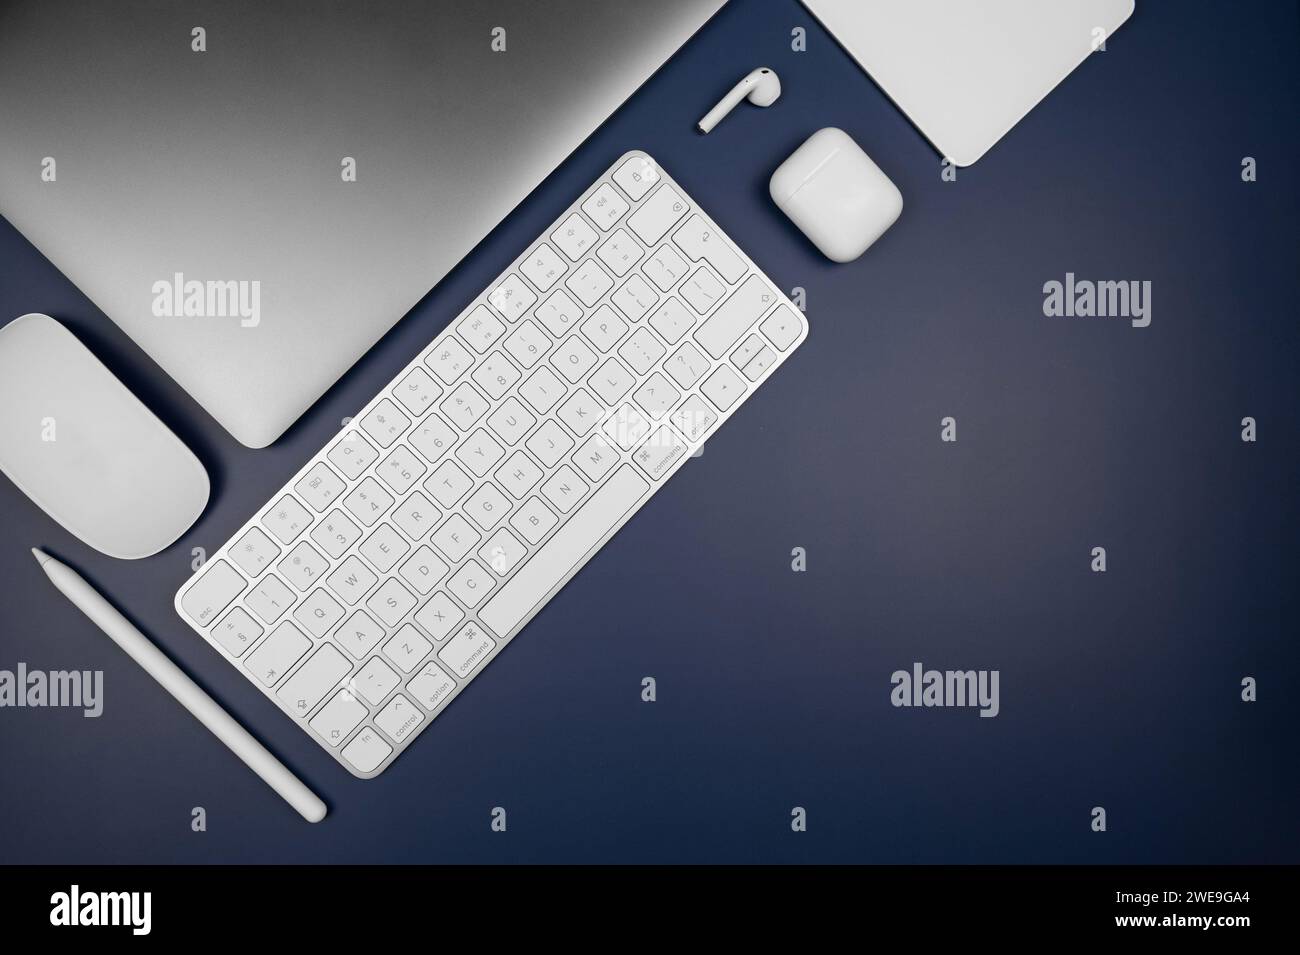 Top view of laptop computer, white keyboard, touchpad, mouse, earphones case and pen on dark blue background. Modern office flat lay, copy space. Stock Photo